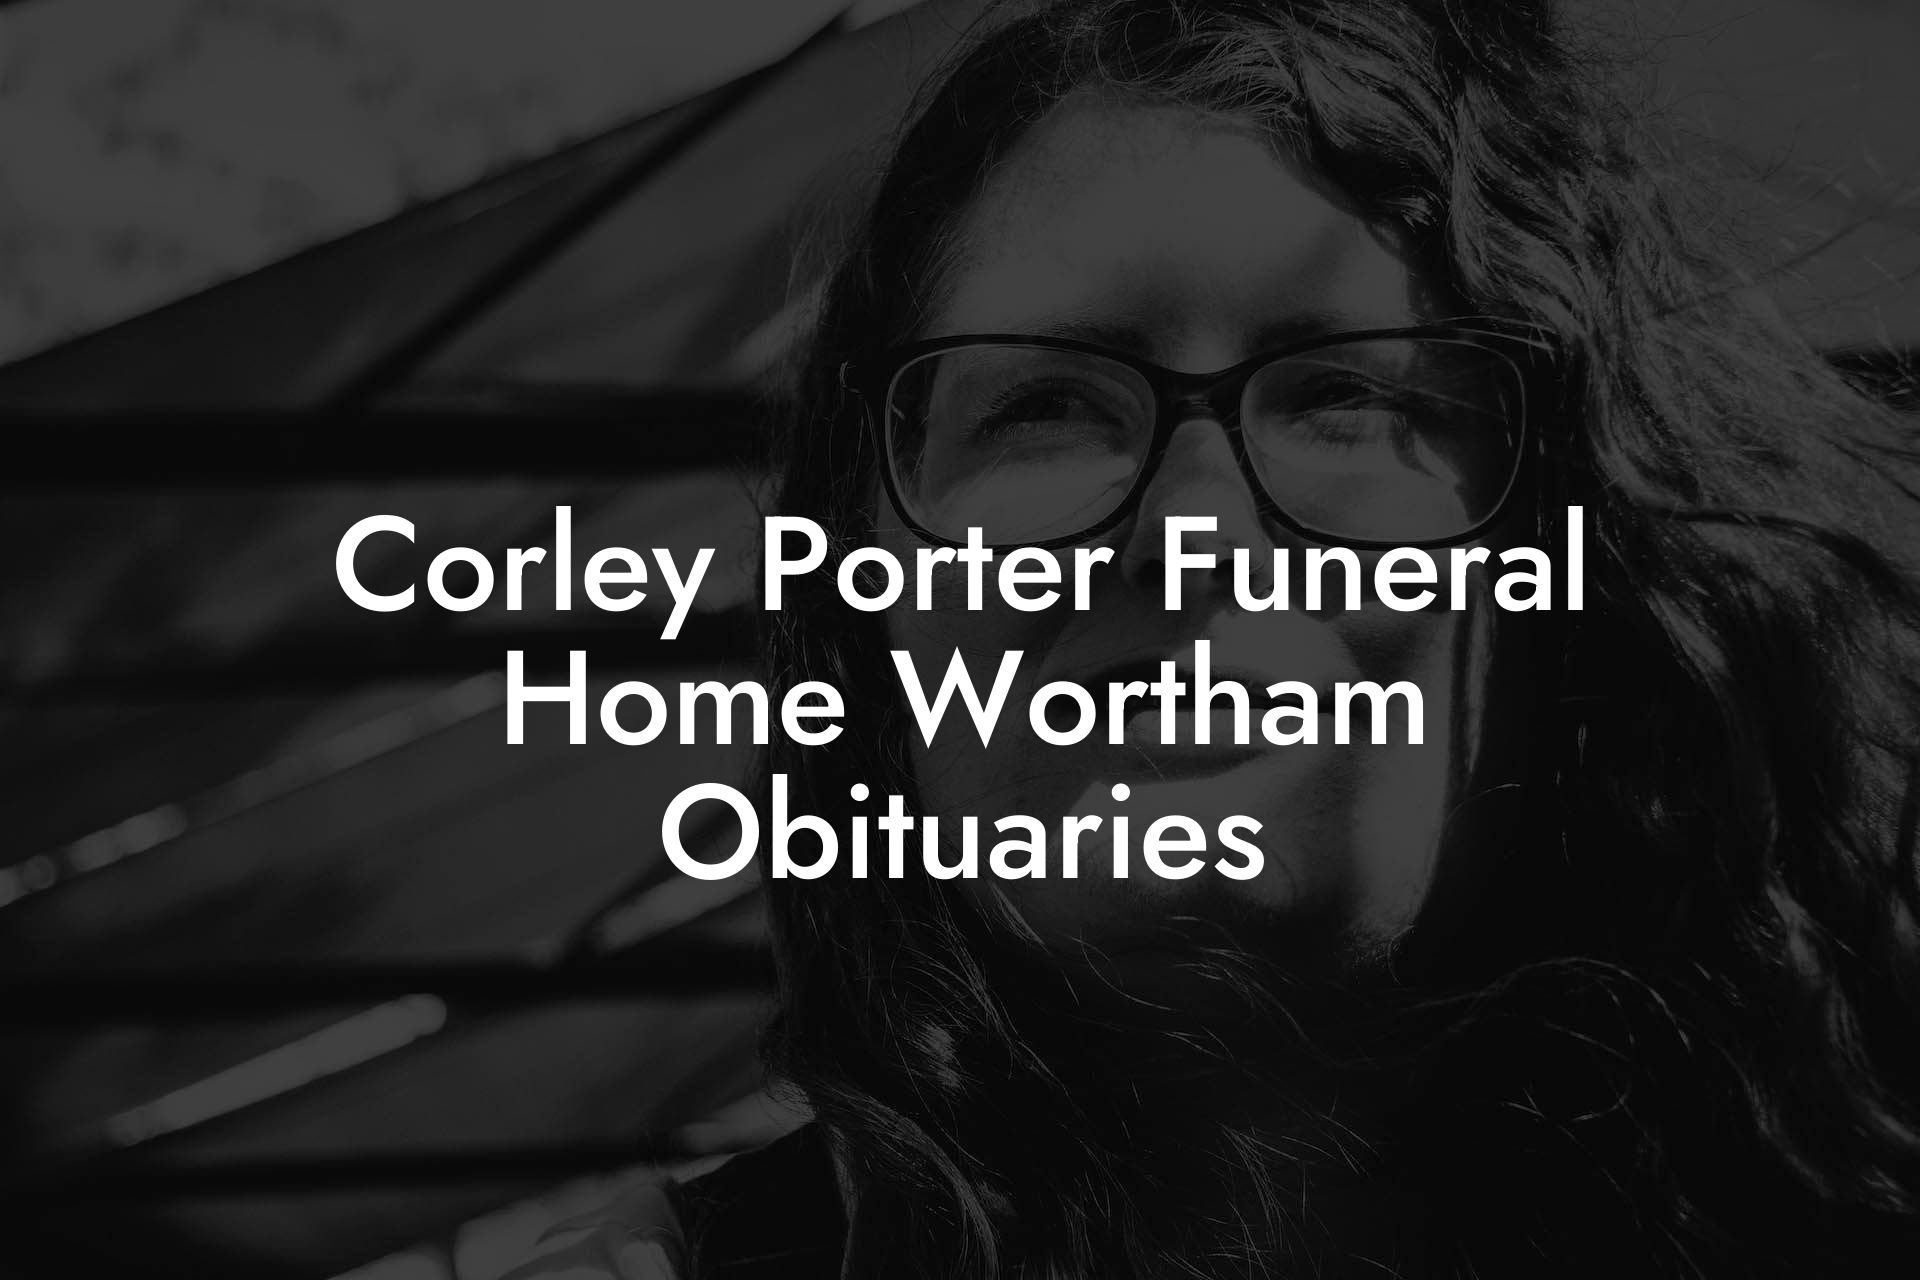 Corley Porter Funeral Home Wortham Obituaries